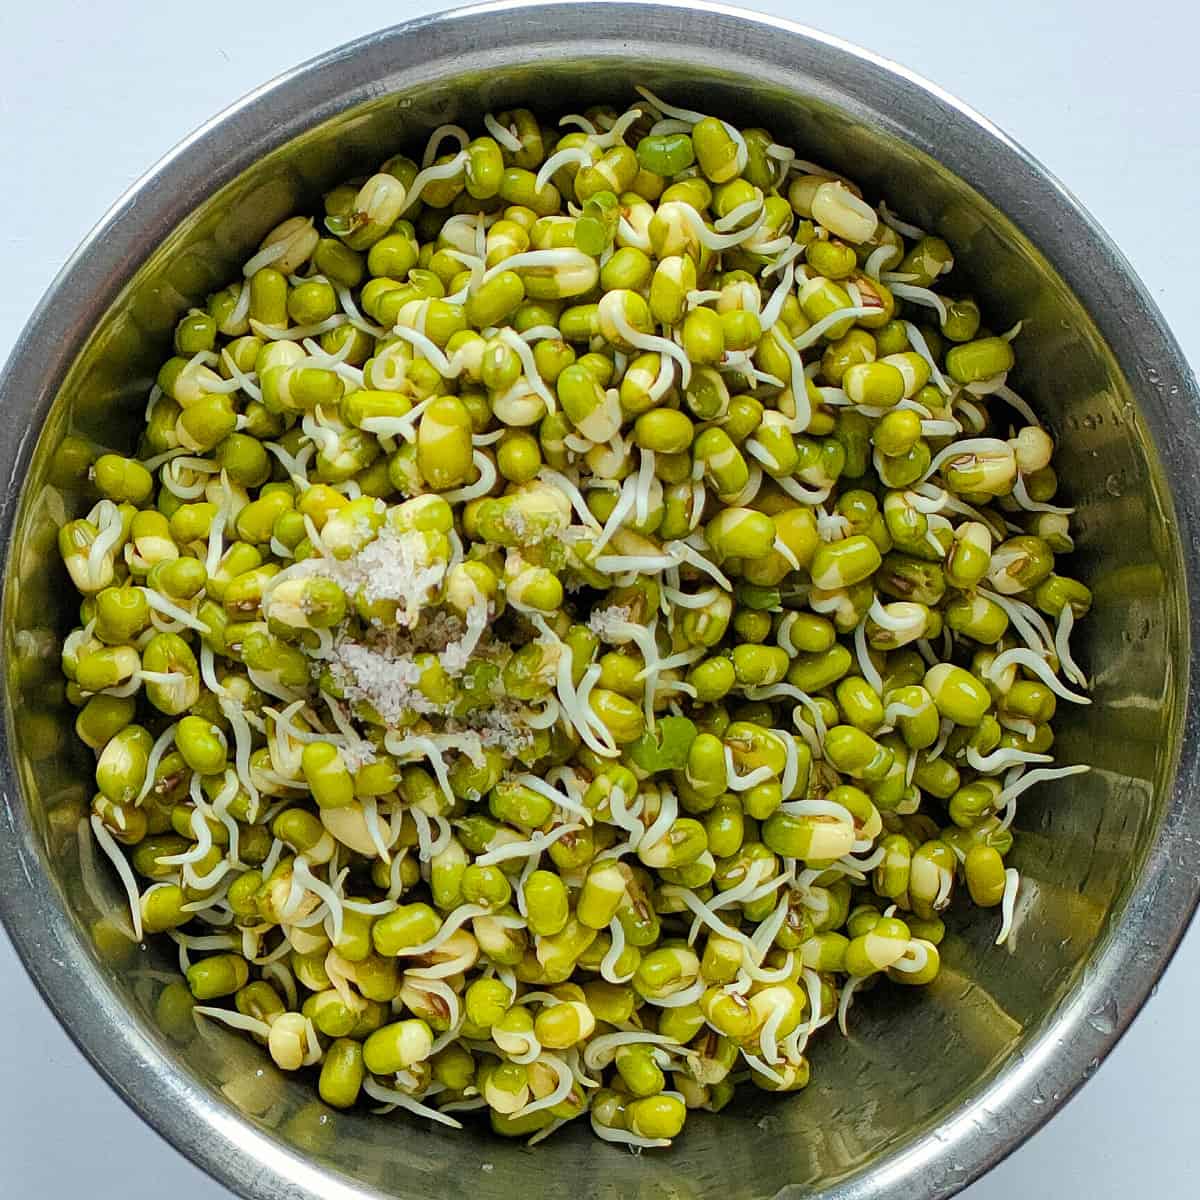 Sprouted mung beans with salt and pepper in a metal bowl.